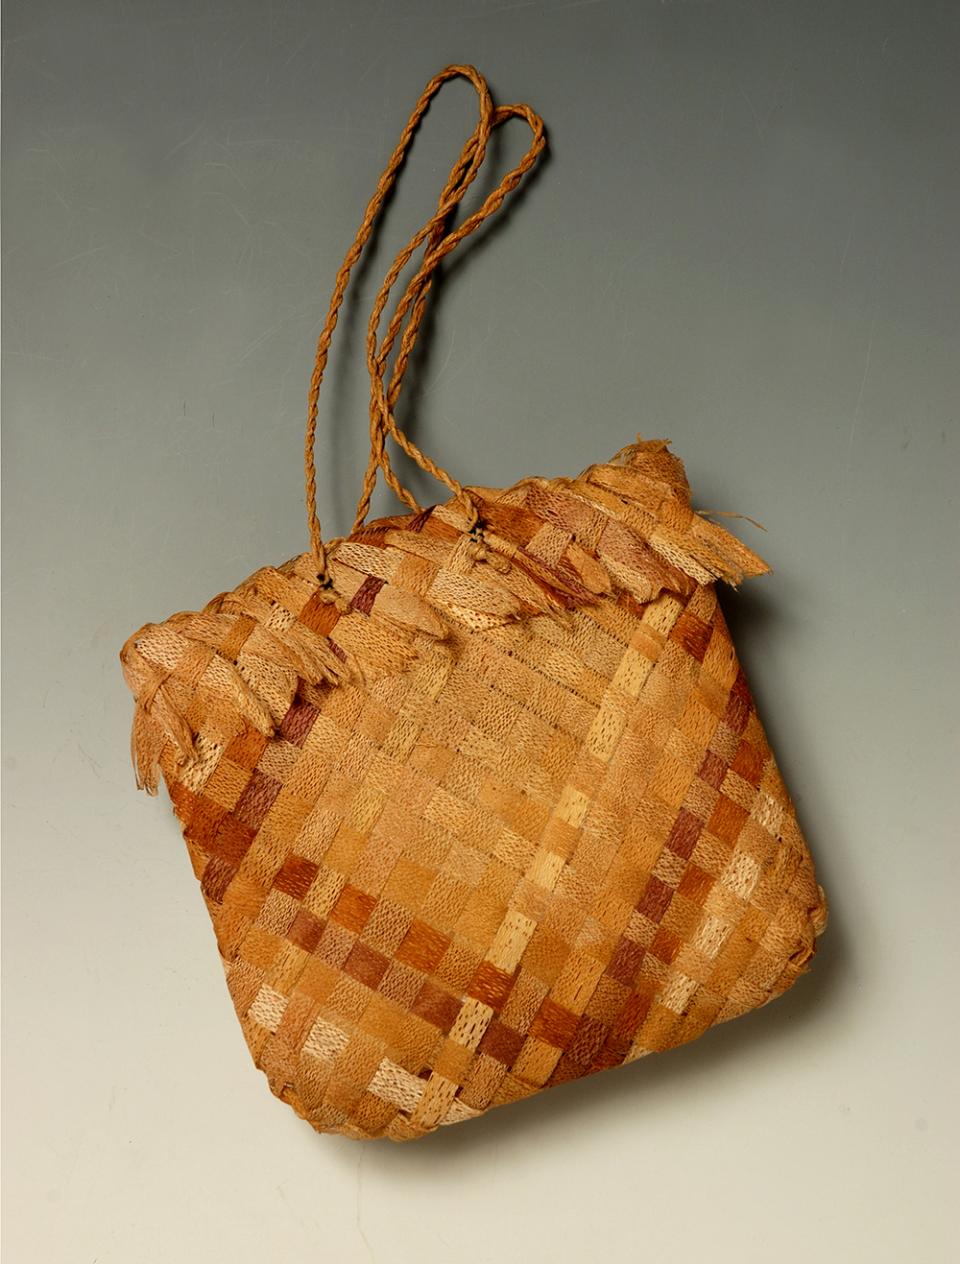 Kete, 19th C, Lacebark, Collection of Aratoi Wairarapa Museum of Art and History. Gift of Elizabeth Burden.